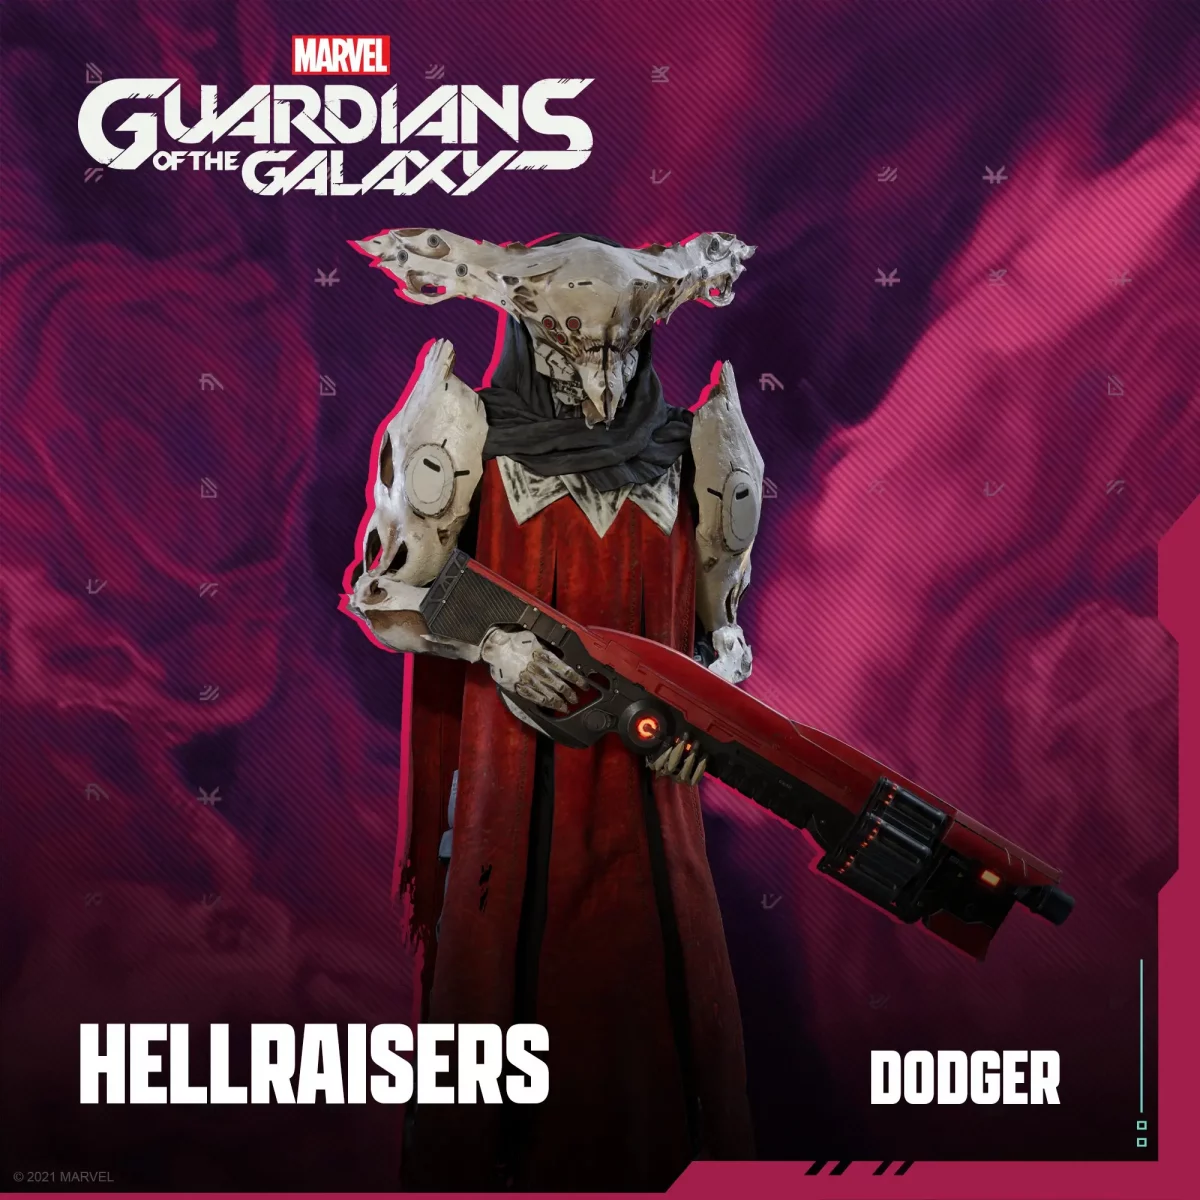 marvels guardians of the galaxy dodger